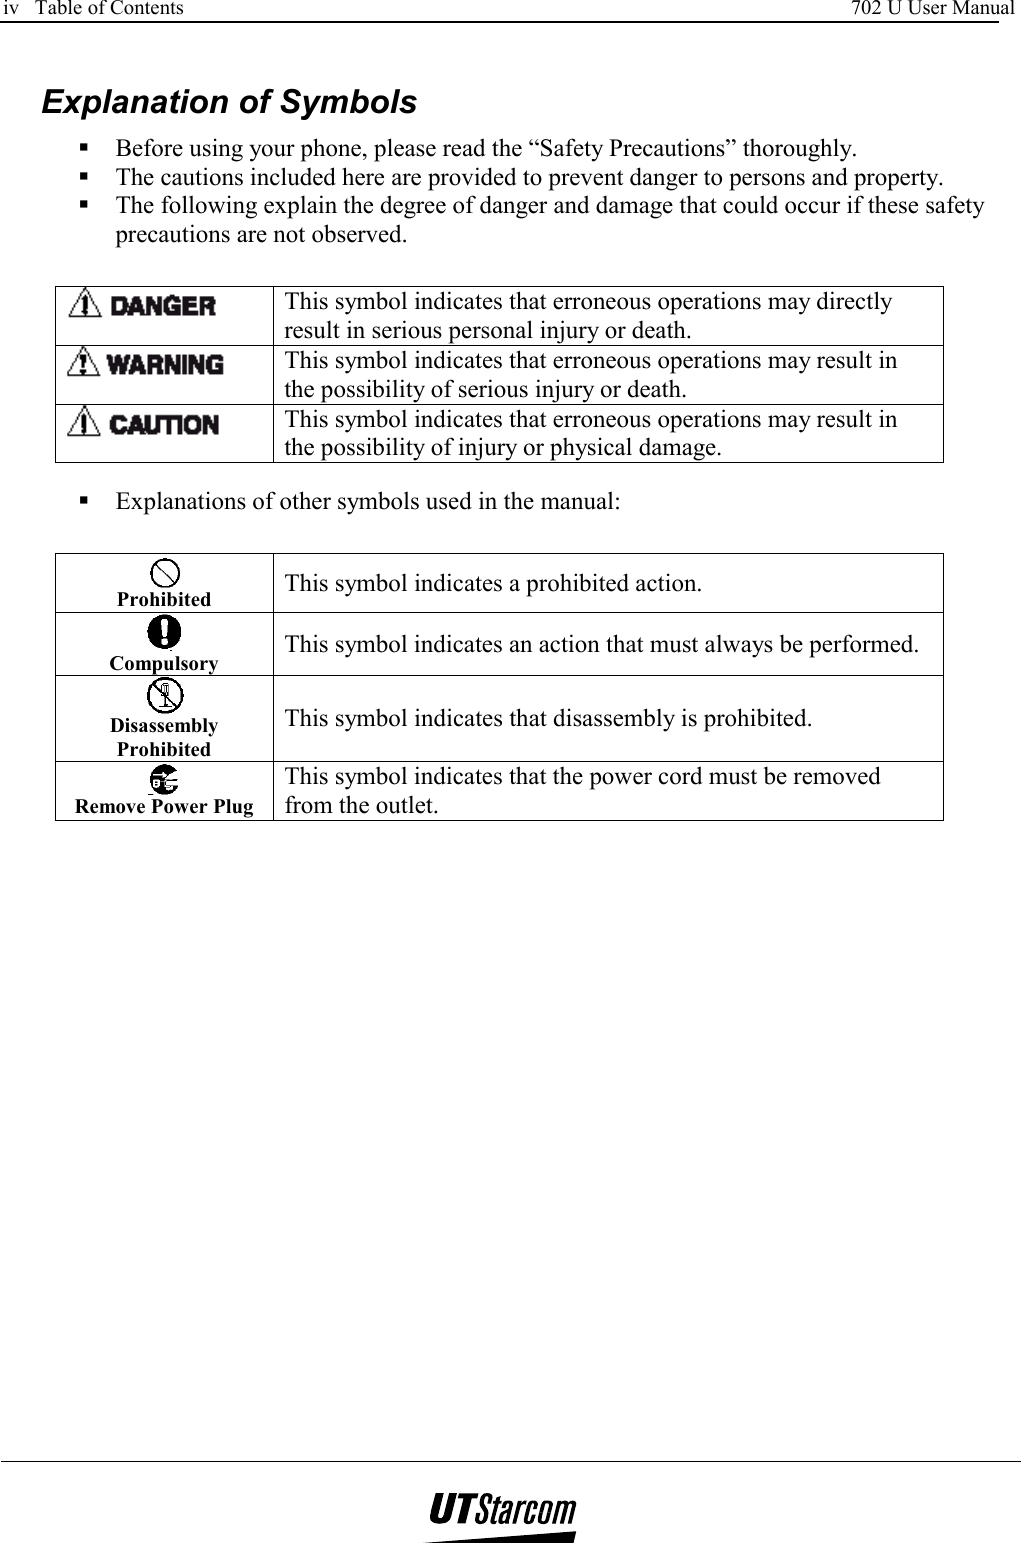 iv   Table of Contents     702 U User Manual        Explanation of Symbols  Before using your phone, please read the “Safety Precautions” thoroughly.  The cautions included here are provided to prevent danger to persons and property.  The following explain the degree of danger and damage that could occur if these safety precautions are not observed.   This symbol indicates that erroneous operations may directly result in serious personal injury or death.  This symbol indicates that erroneous operations may result in the possibility of serious injury or death.  This symbol indicates that erroneous operations may result in the possibility of injury or physical damage.   Explanations of other symbols used in the manual:  Prohibited   This symbol indicates a prohibited action.  Compulsory  This symbol indicates an action that must always be performed.  Disassembly Prohibited This symbol indicates that disassembly is prohibited.  Remove Power Plug This symbol indicates that the power cord must be removed from the outlet.  